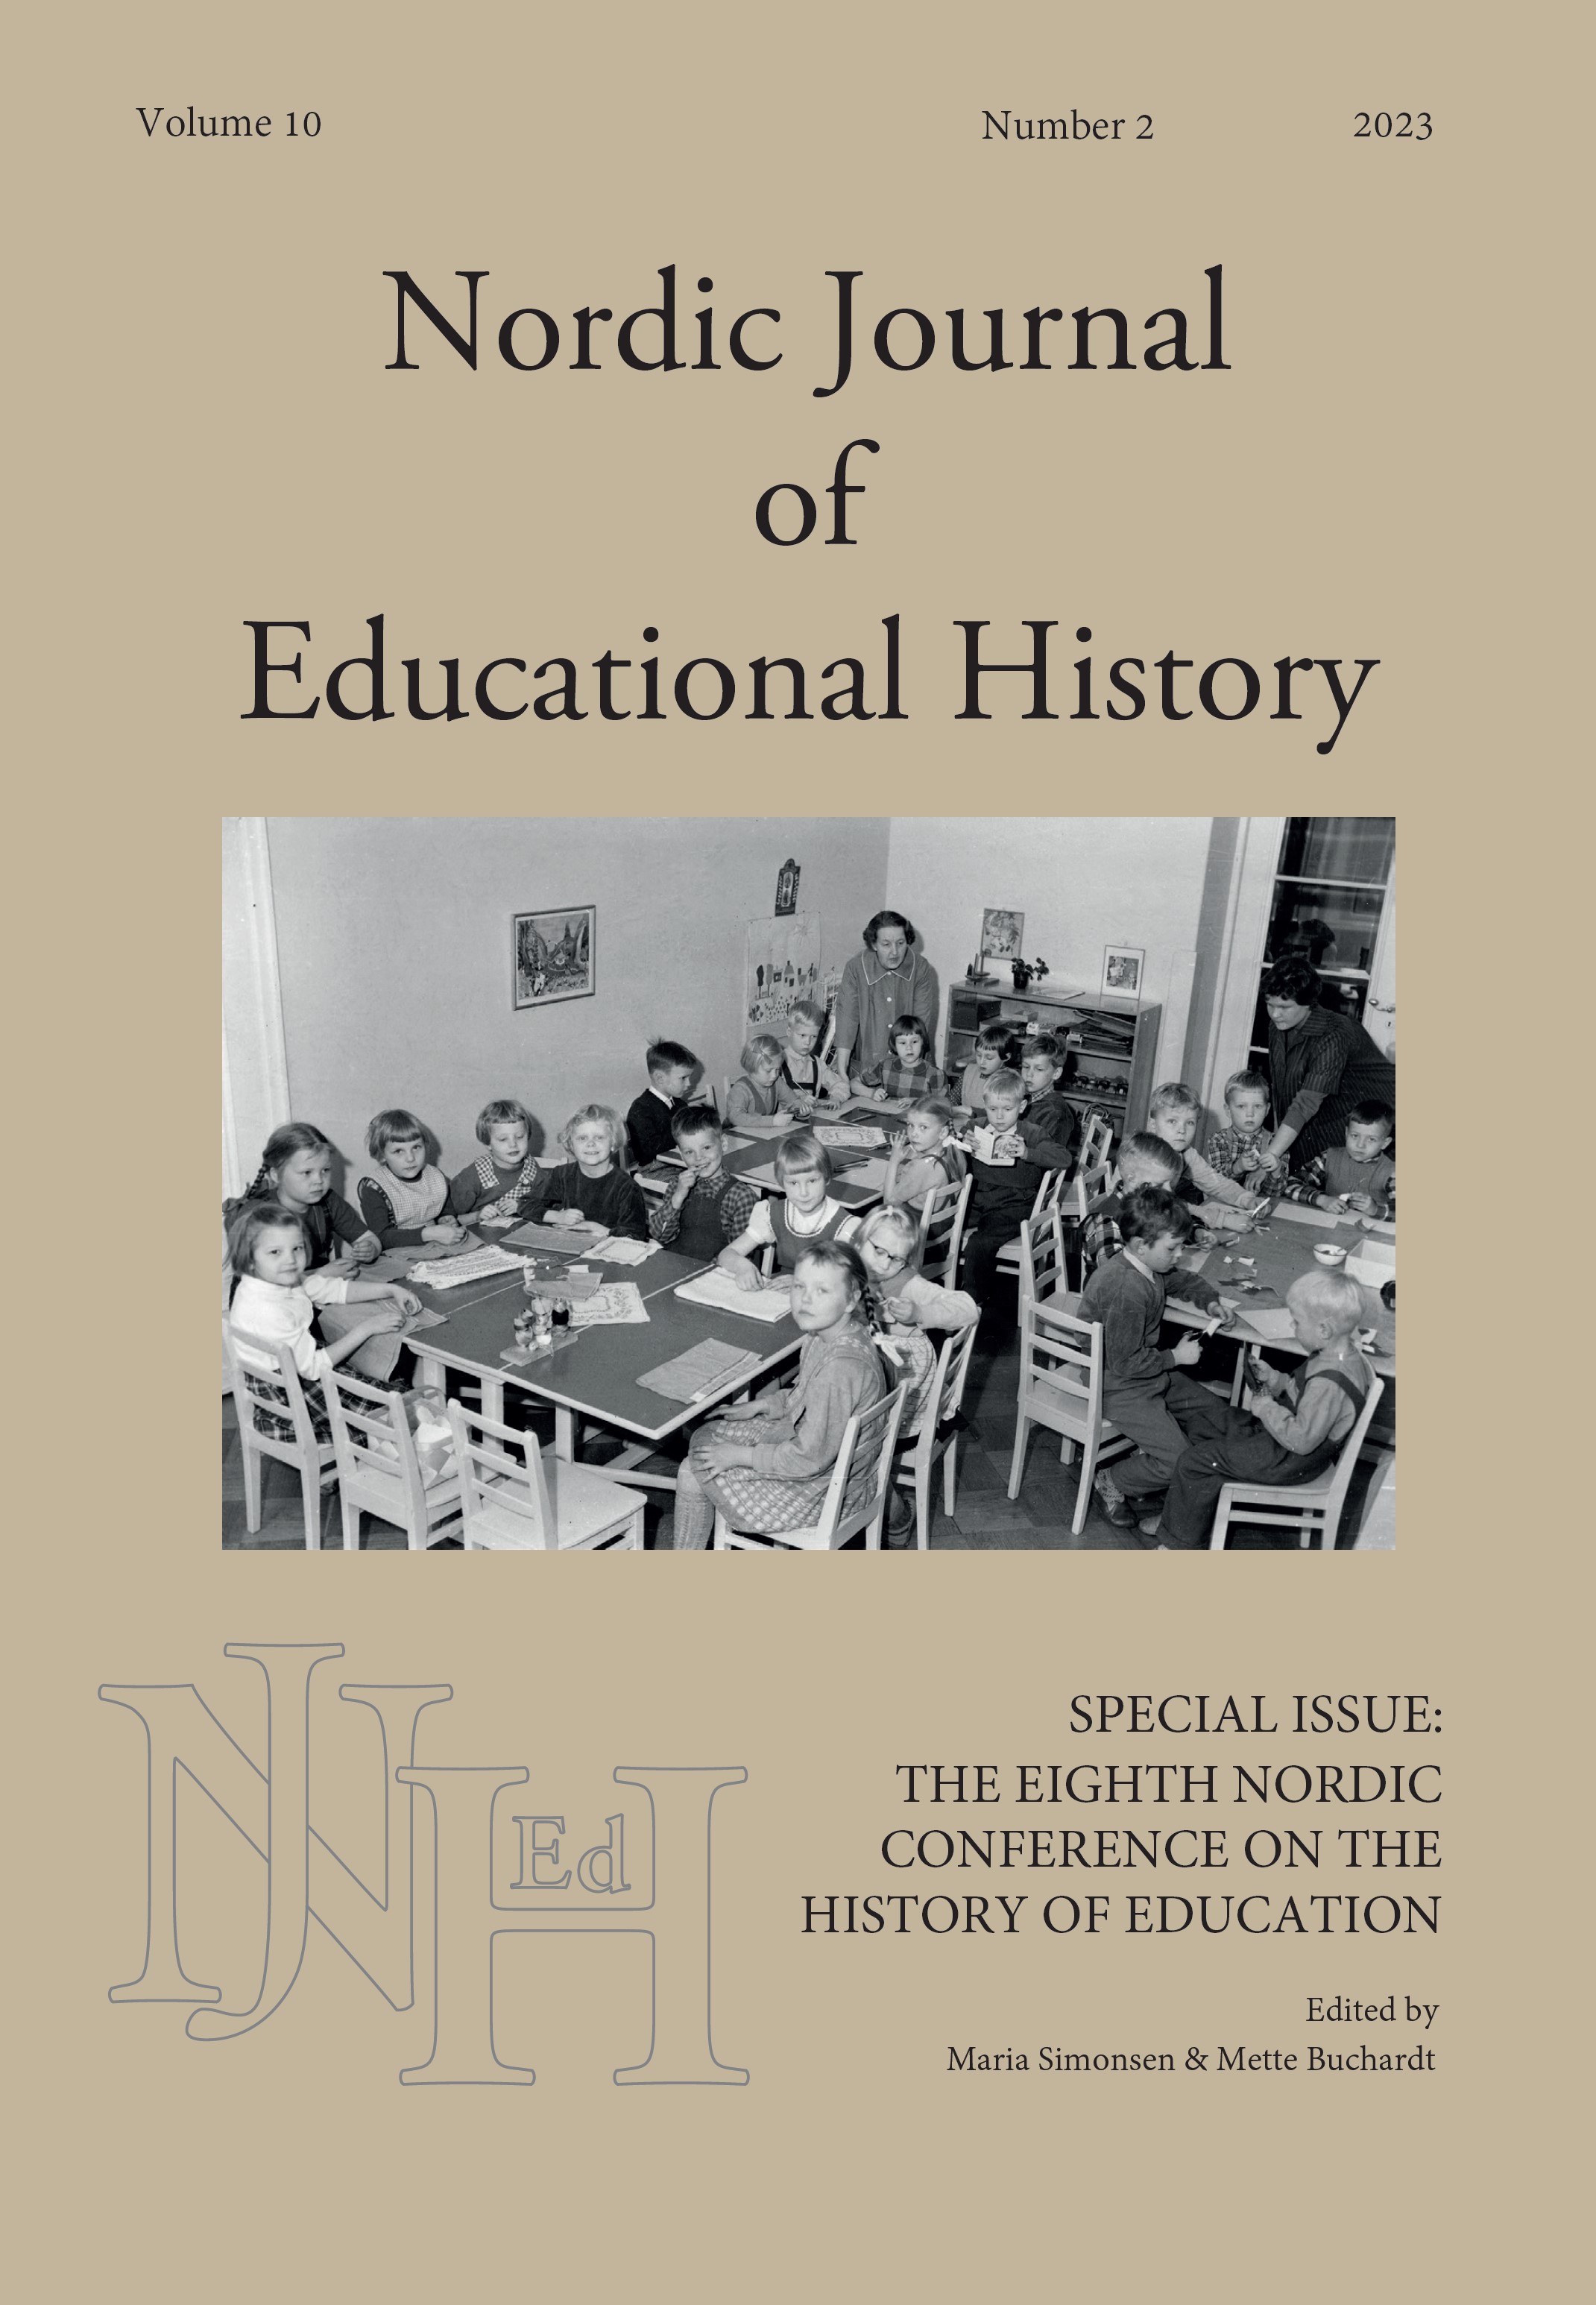 					View Vol. 10 No. 2 (2023): Special Issue: The Eighth Nordic Conference on the History of Education
				